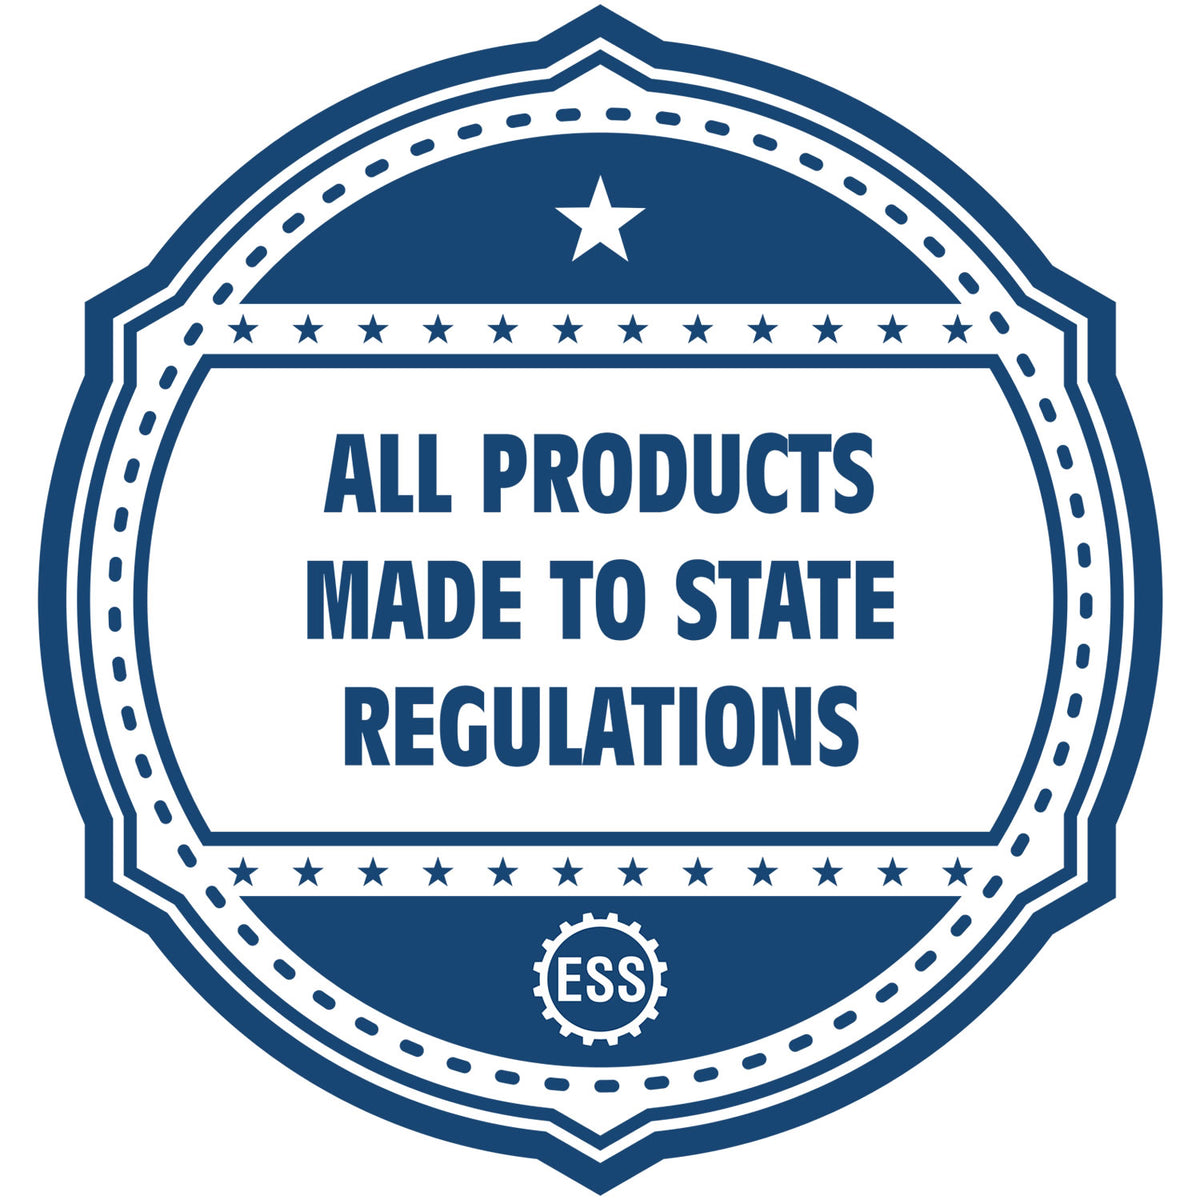 An icon or badge element for the South Carolina Engineer Desk Seal showing that this product is made in compliance with state regulations.